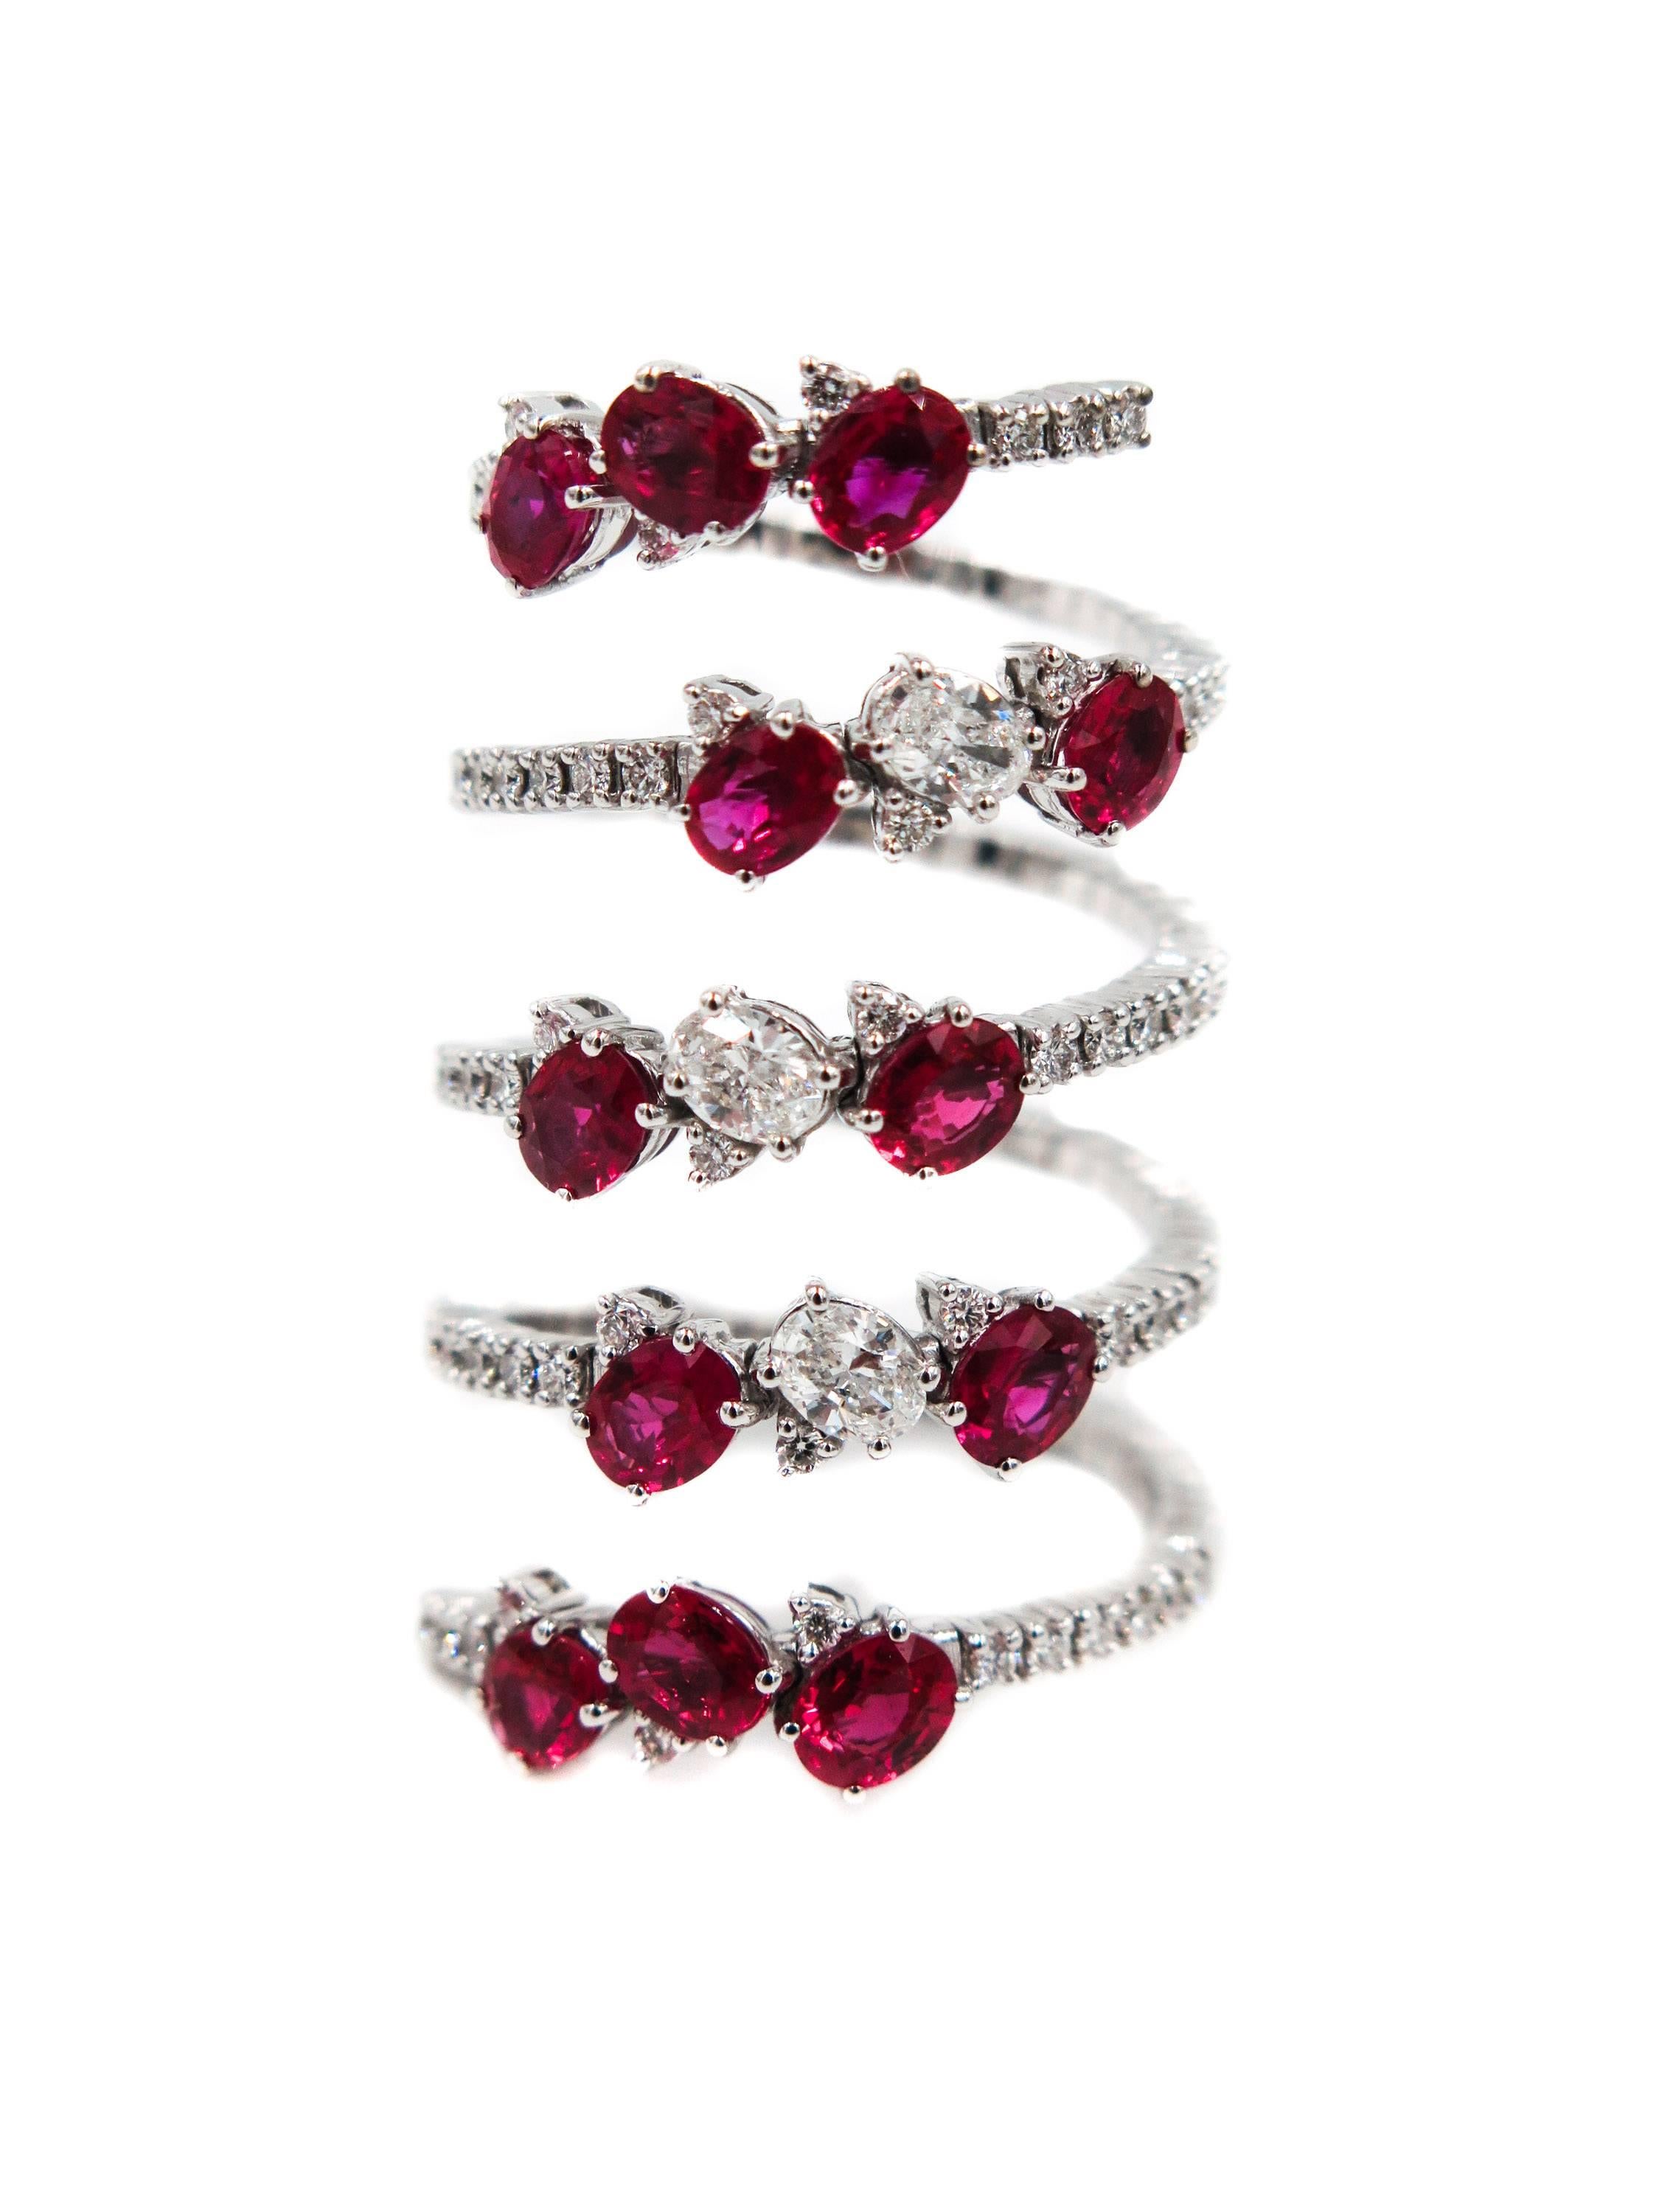 The harmony of nature, symbol of timeless beauty inspired Leo Pizzo to create this unique spiral ruby and diamond ring with 3.54 carats of rubies and 1.14 carats of diamonds. 
The intense ruby red color and the brilliant white diamonds reveal an